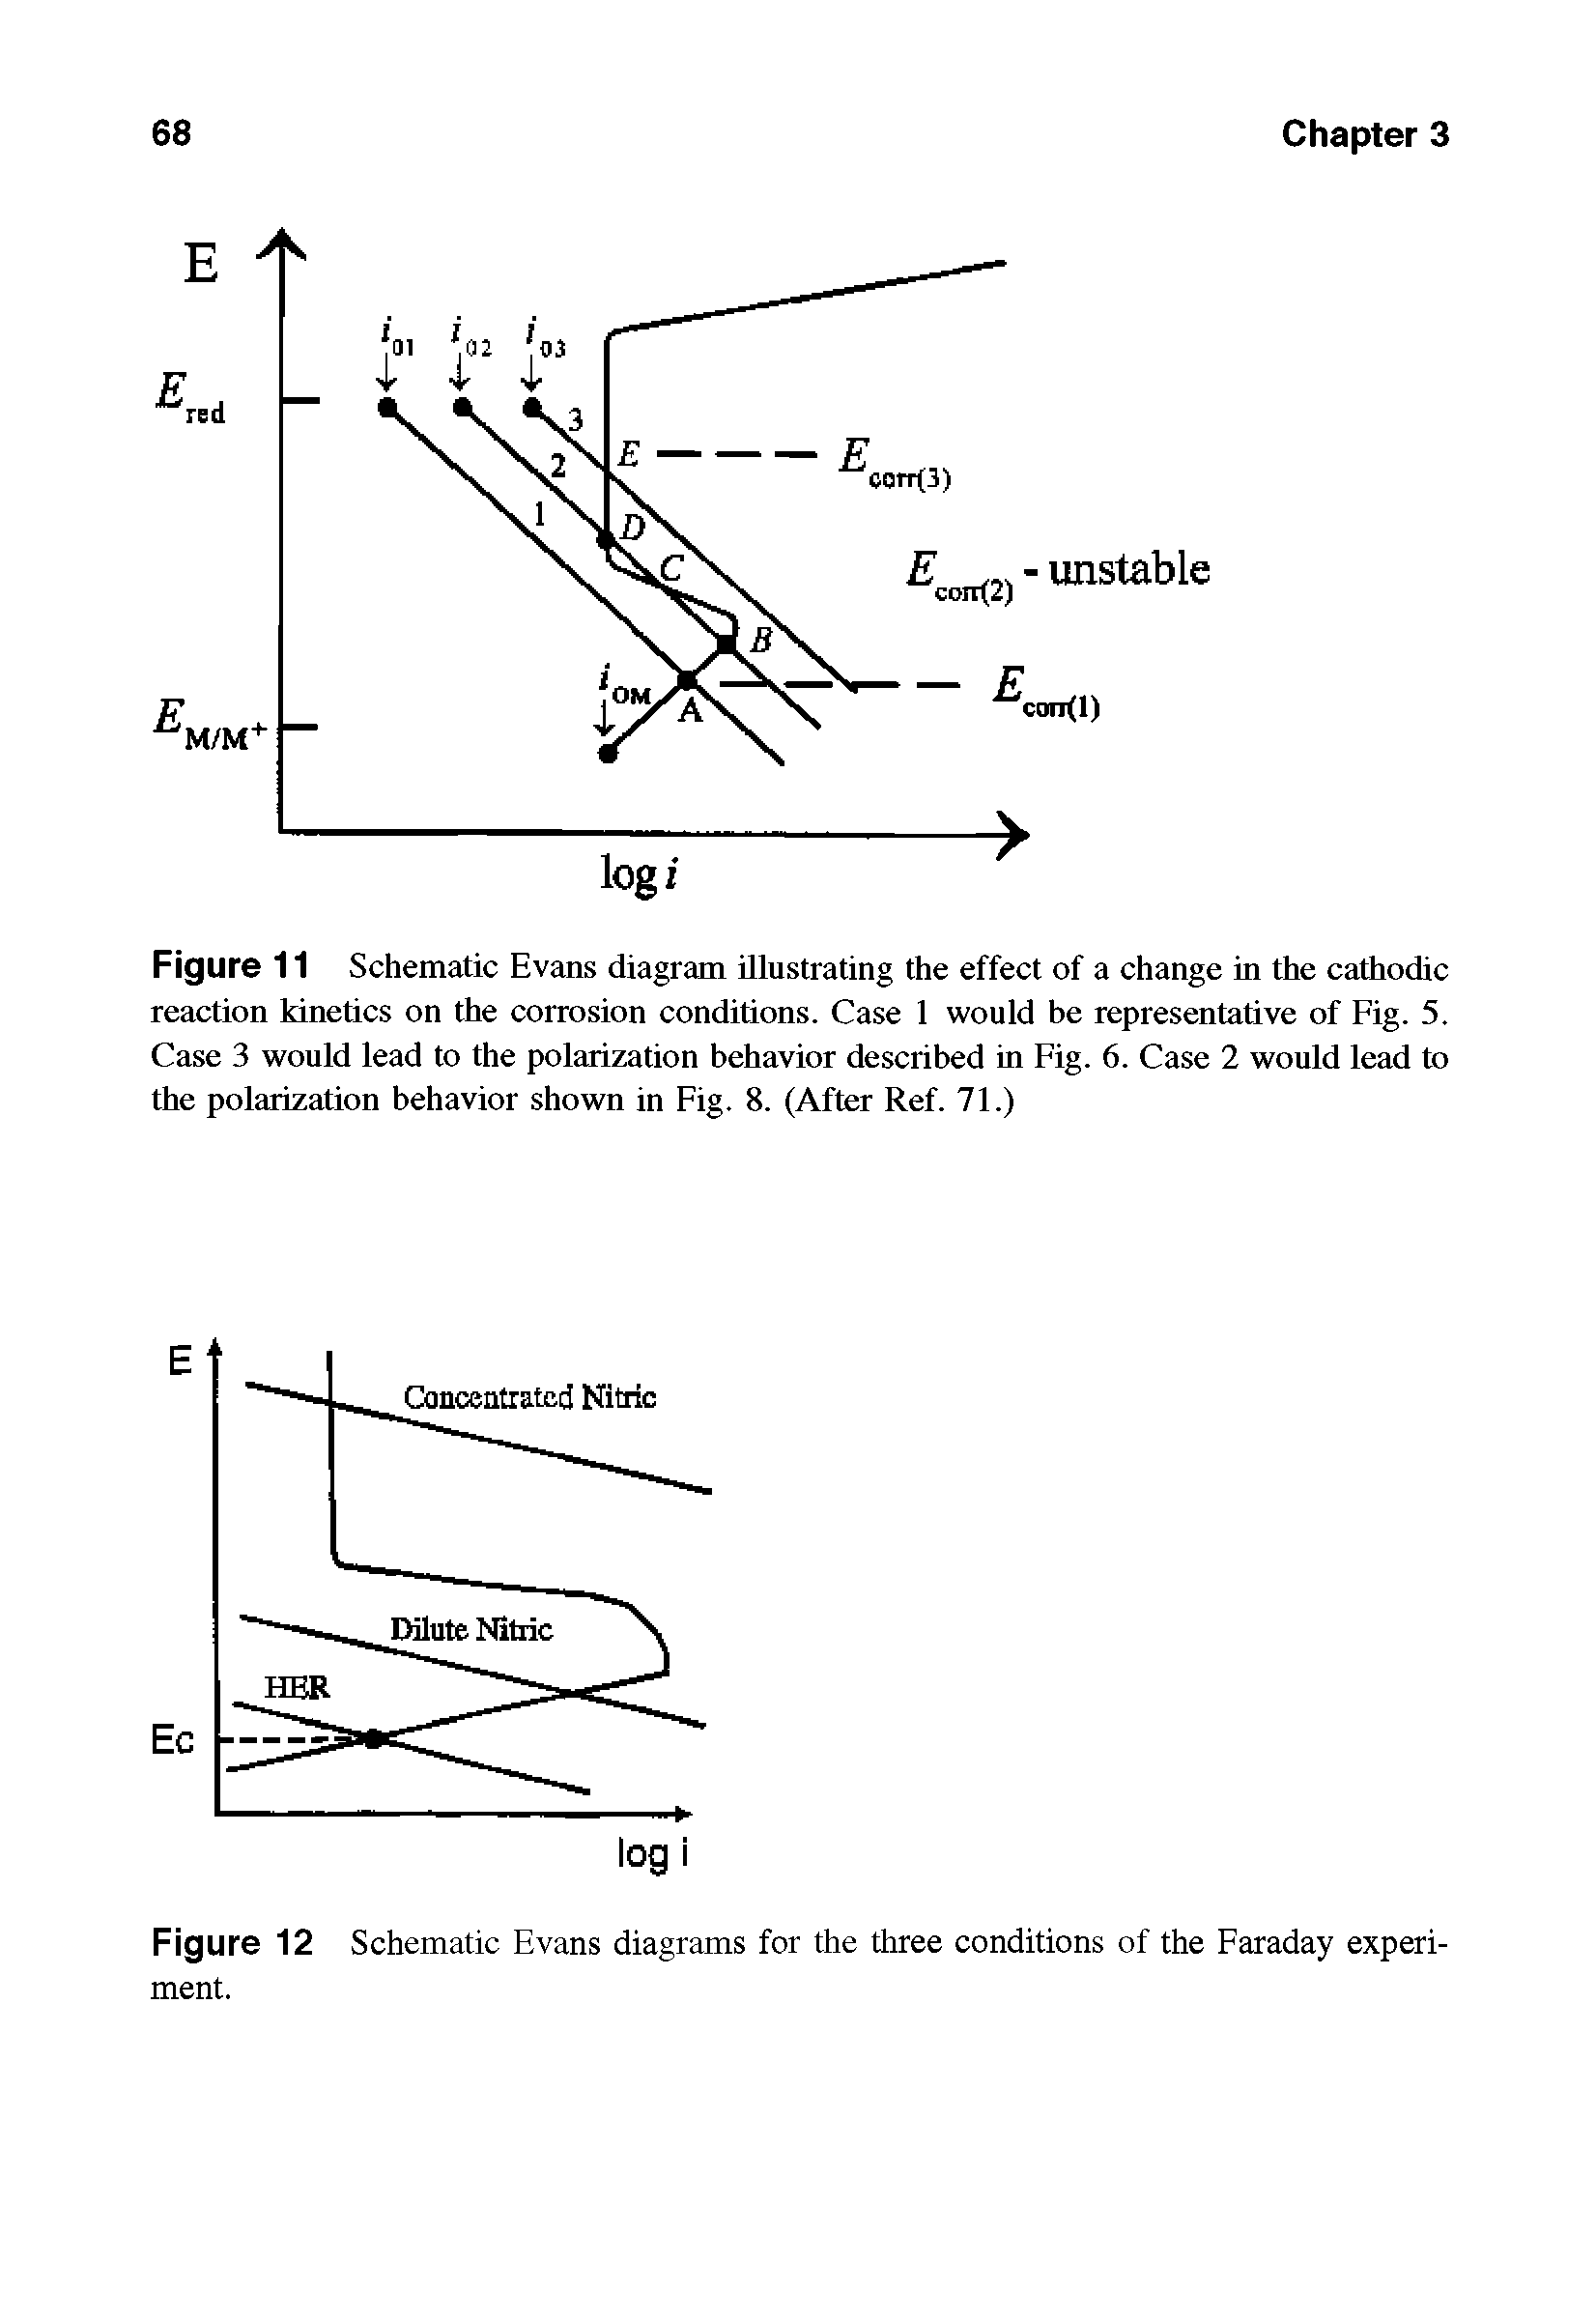 Figure 11 Schematic Evans diagram illustrating the effect of a change in the cathodic reaction kinetics on the corrosion conditions. Case 1 would be representative of Fig. 5. Case 3 would lead to the polarization behavior described in Fig. 6. Case 2 would lead to the polarization behavior shown in Fig. 8. (After Ref. 71.)...